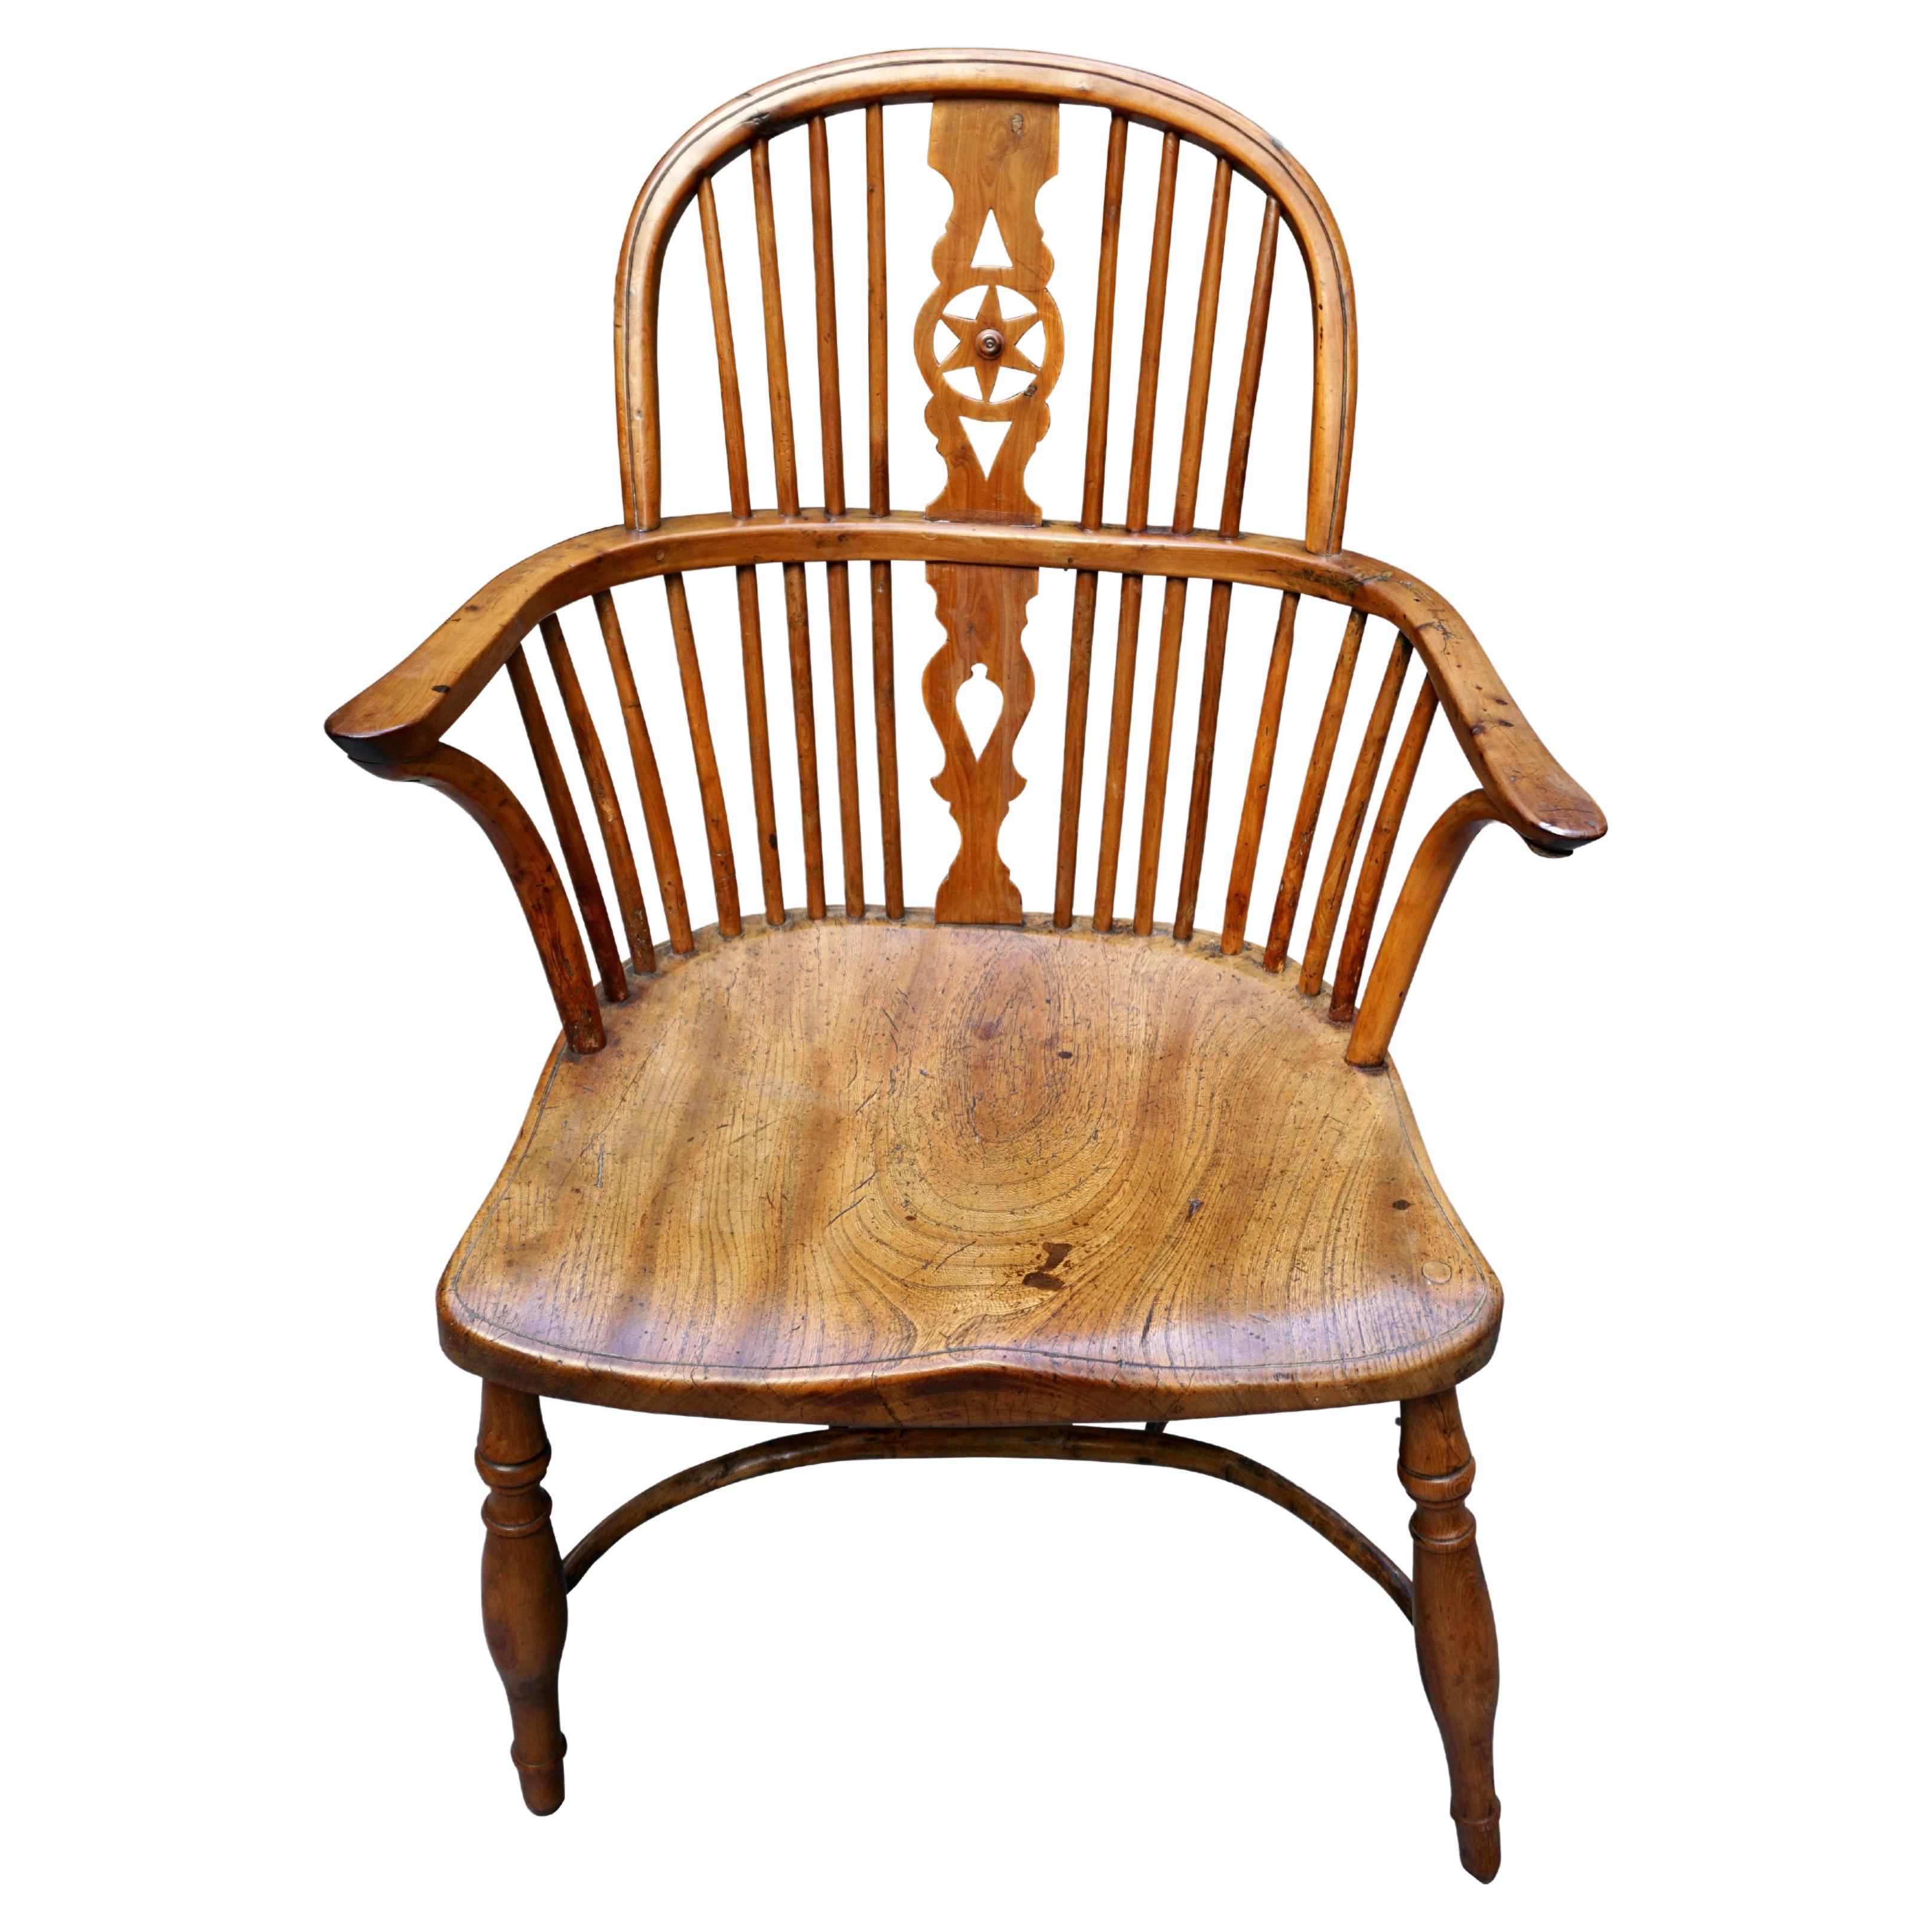 A charming English provincial yew wood and hickory windsor arm chair with a saddle seat, the splat back centered by a star, the legs joined by a crinoline stretcher. Circa 1840. Old repairs. This piece has great character!.